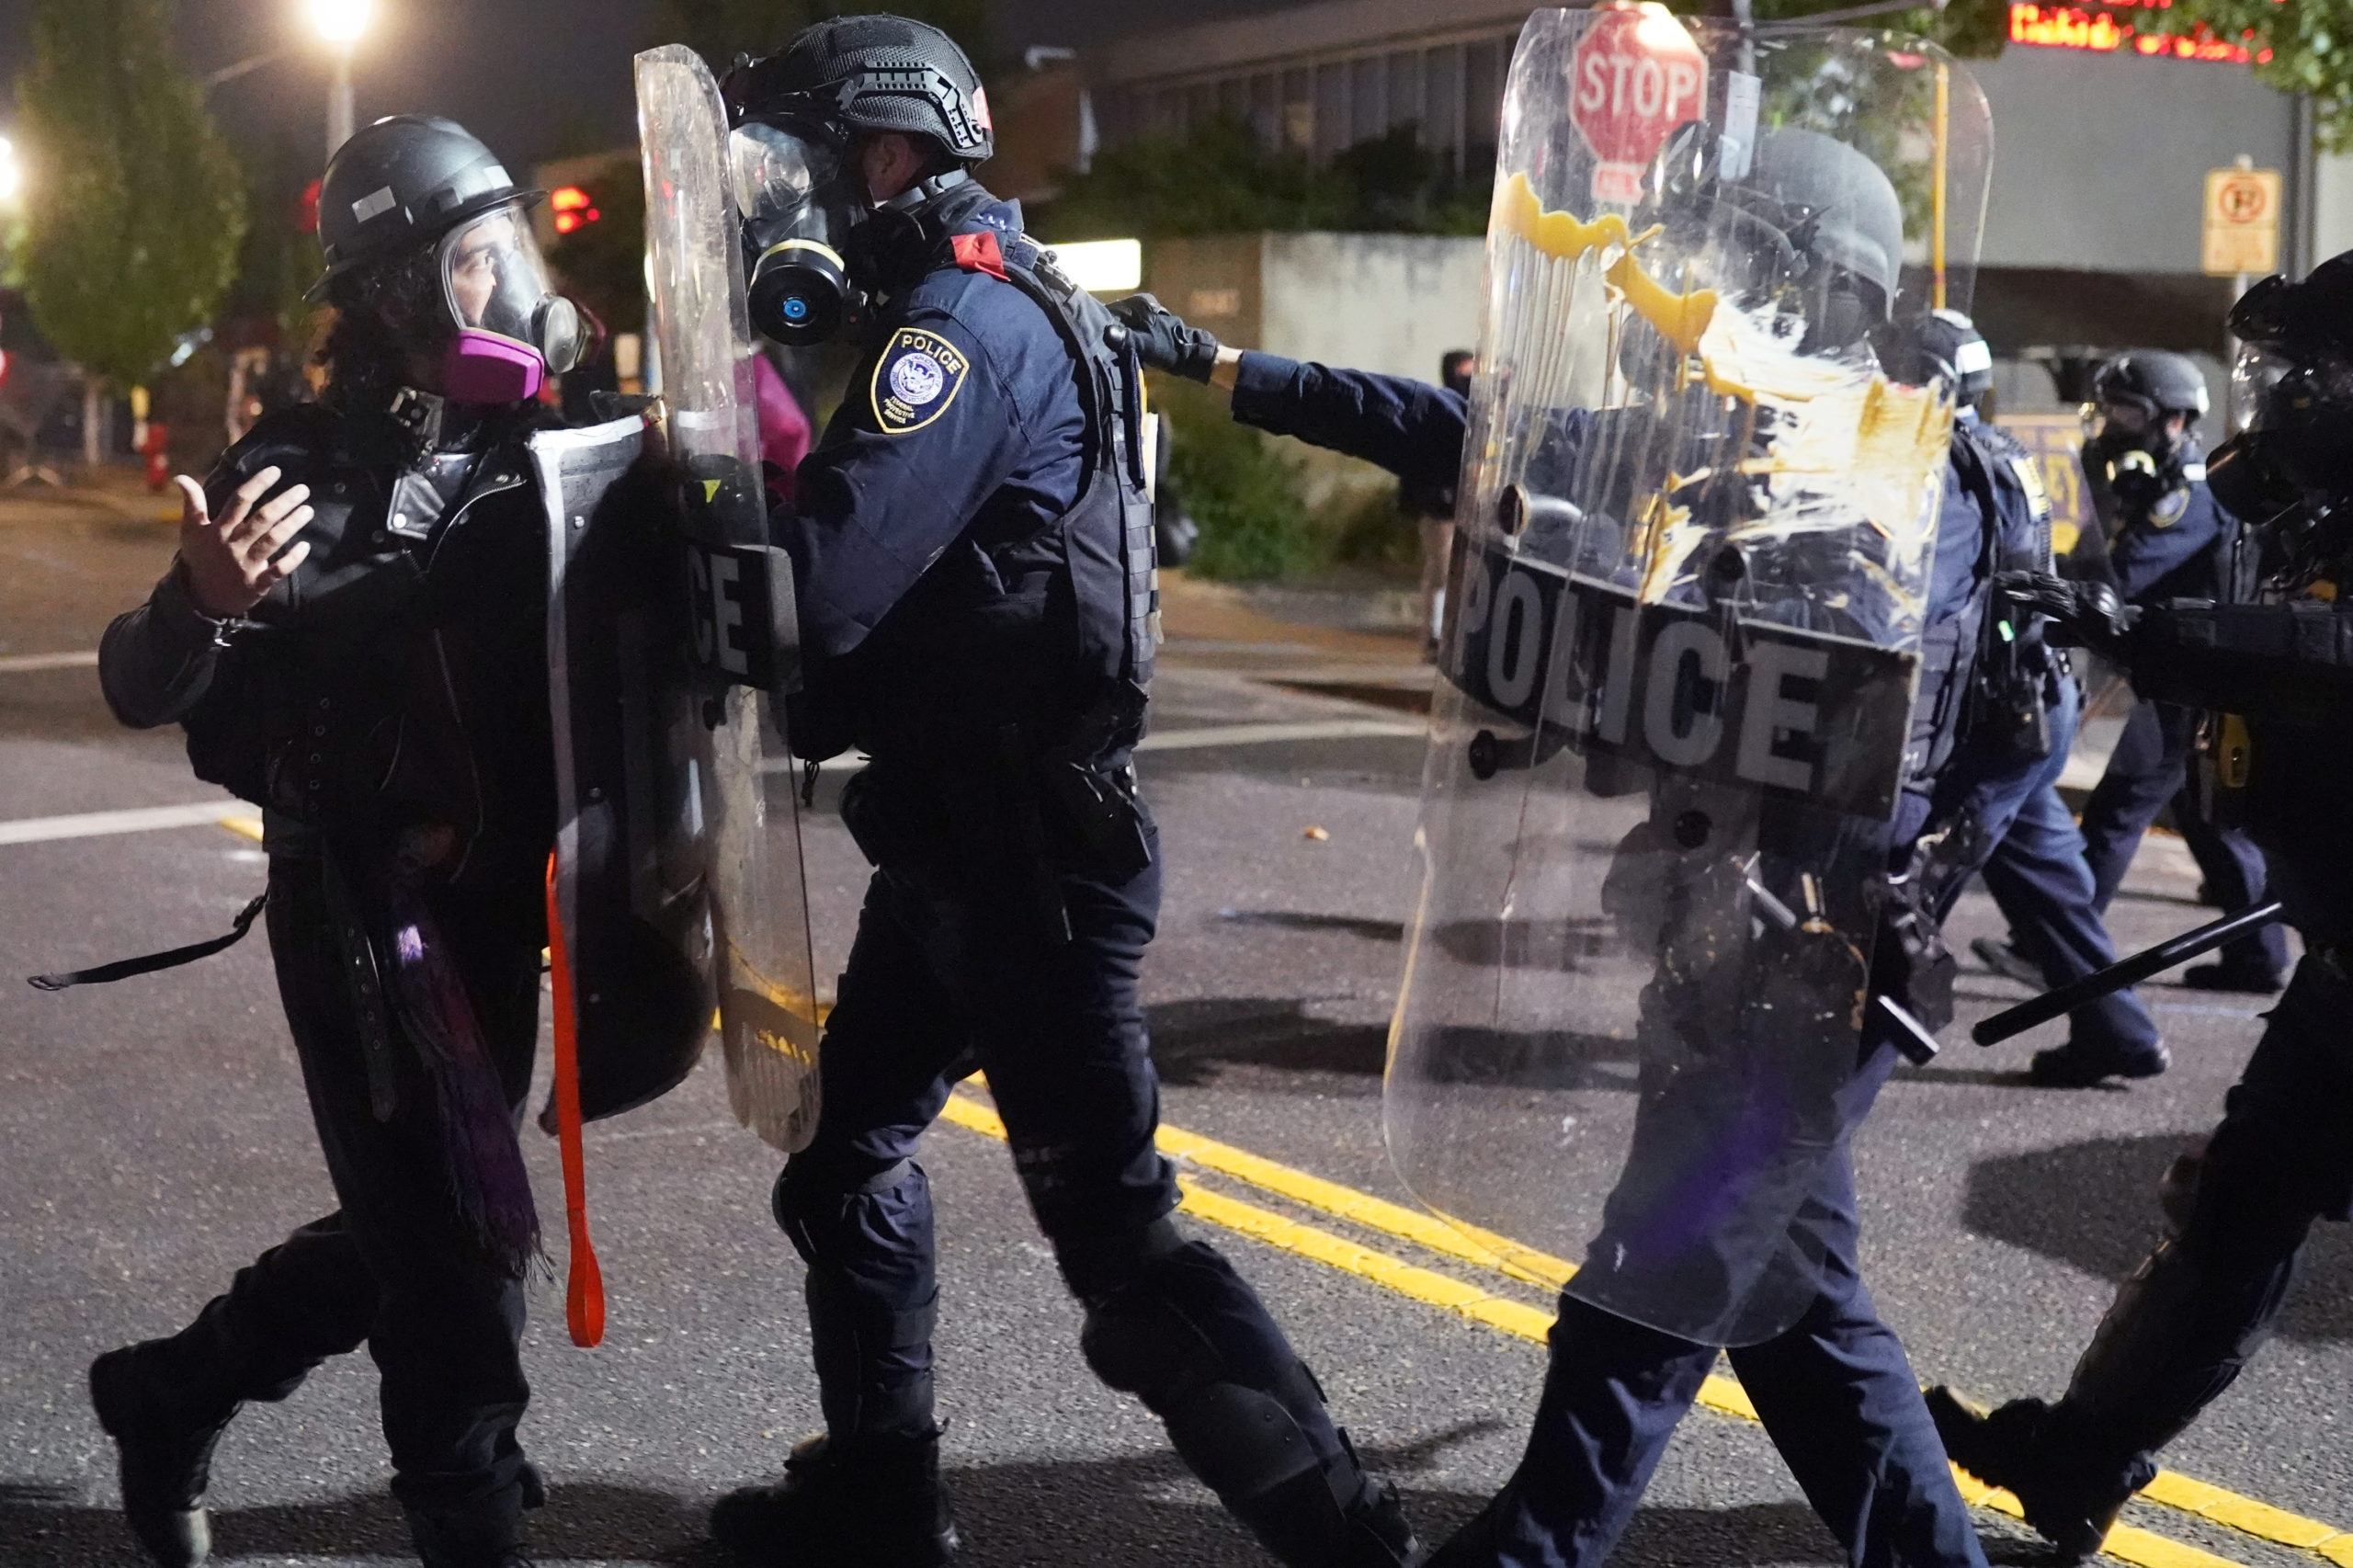 PORTLAND, OR - AUGUST 20: Federal officers use riot shields to push a protester while dispersing a crowd of about 150 people from in front of the Immigration and Customs Enforcement (ICE) detention facility on August 20, 2020 in Portland, Oregon. For the second night in a row federal police clashed with crowds in South Waterfront after being absent from Portlands nightly protest for weeks. (Photo by Nathan Howard/Getty Images)